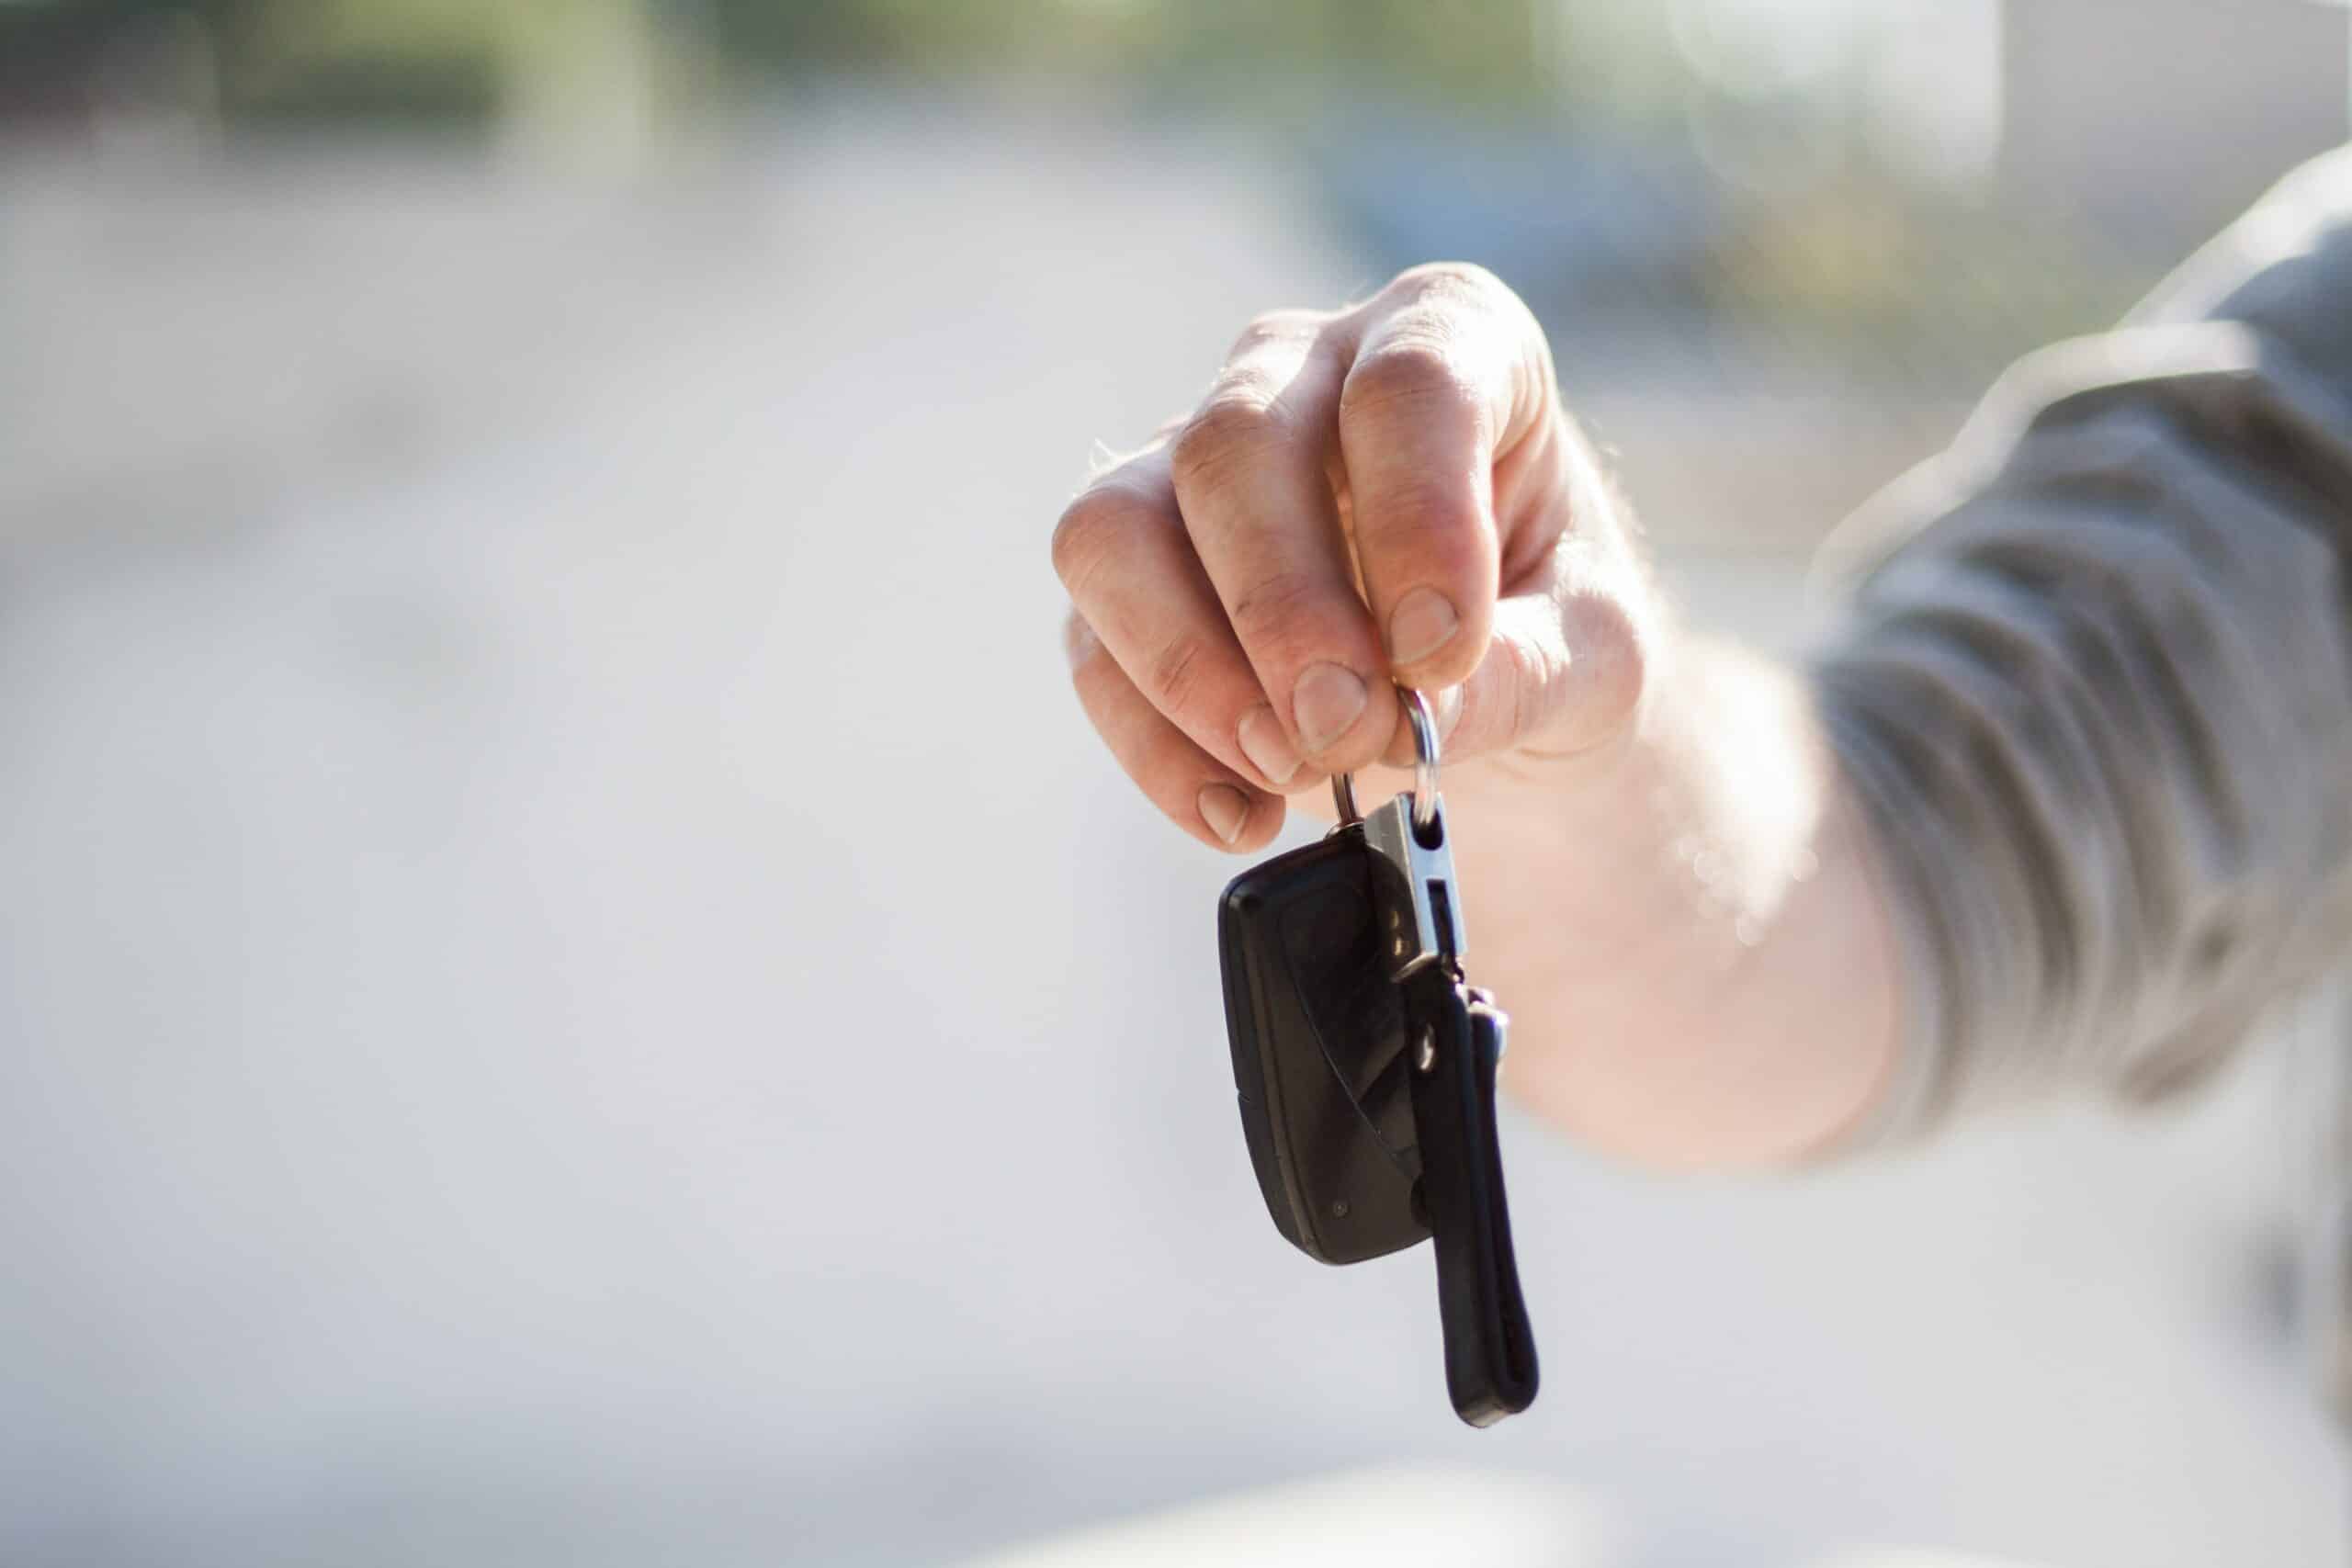 The High Price of Security: Why Replacement Car Keys Cost So Much?